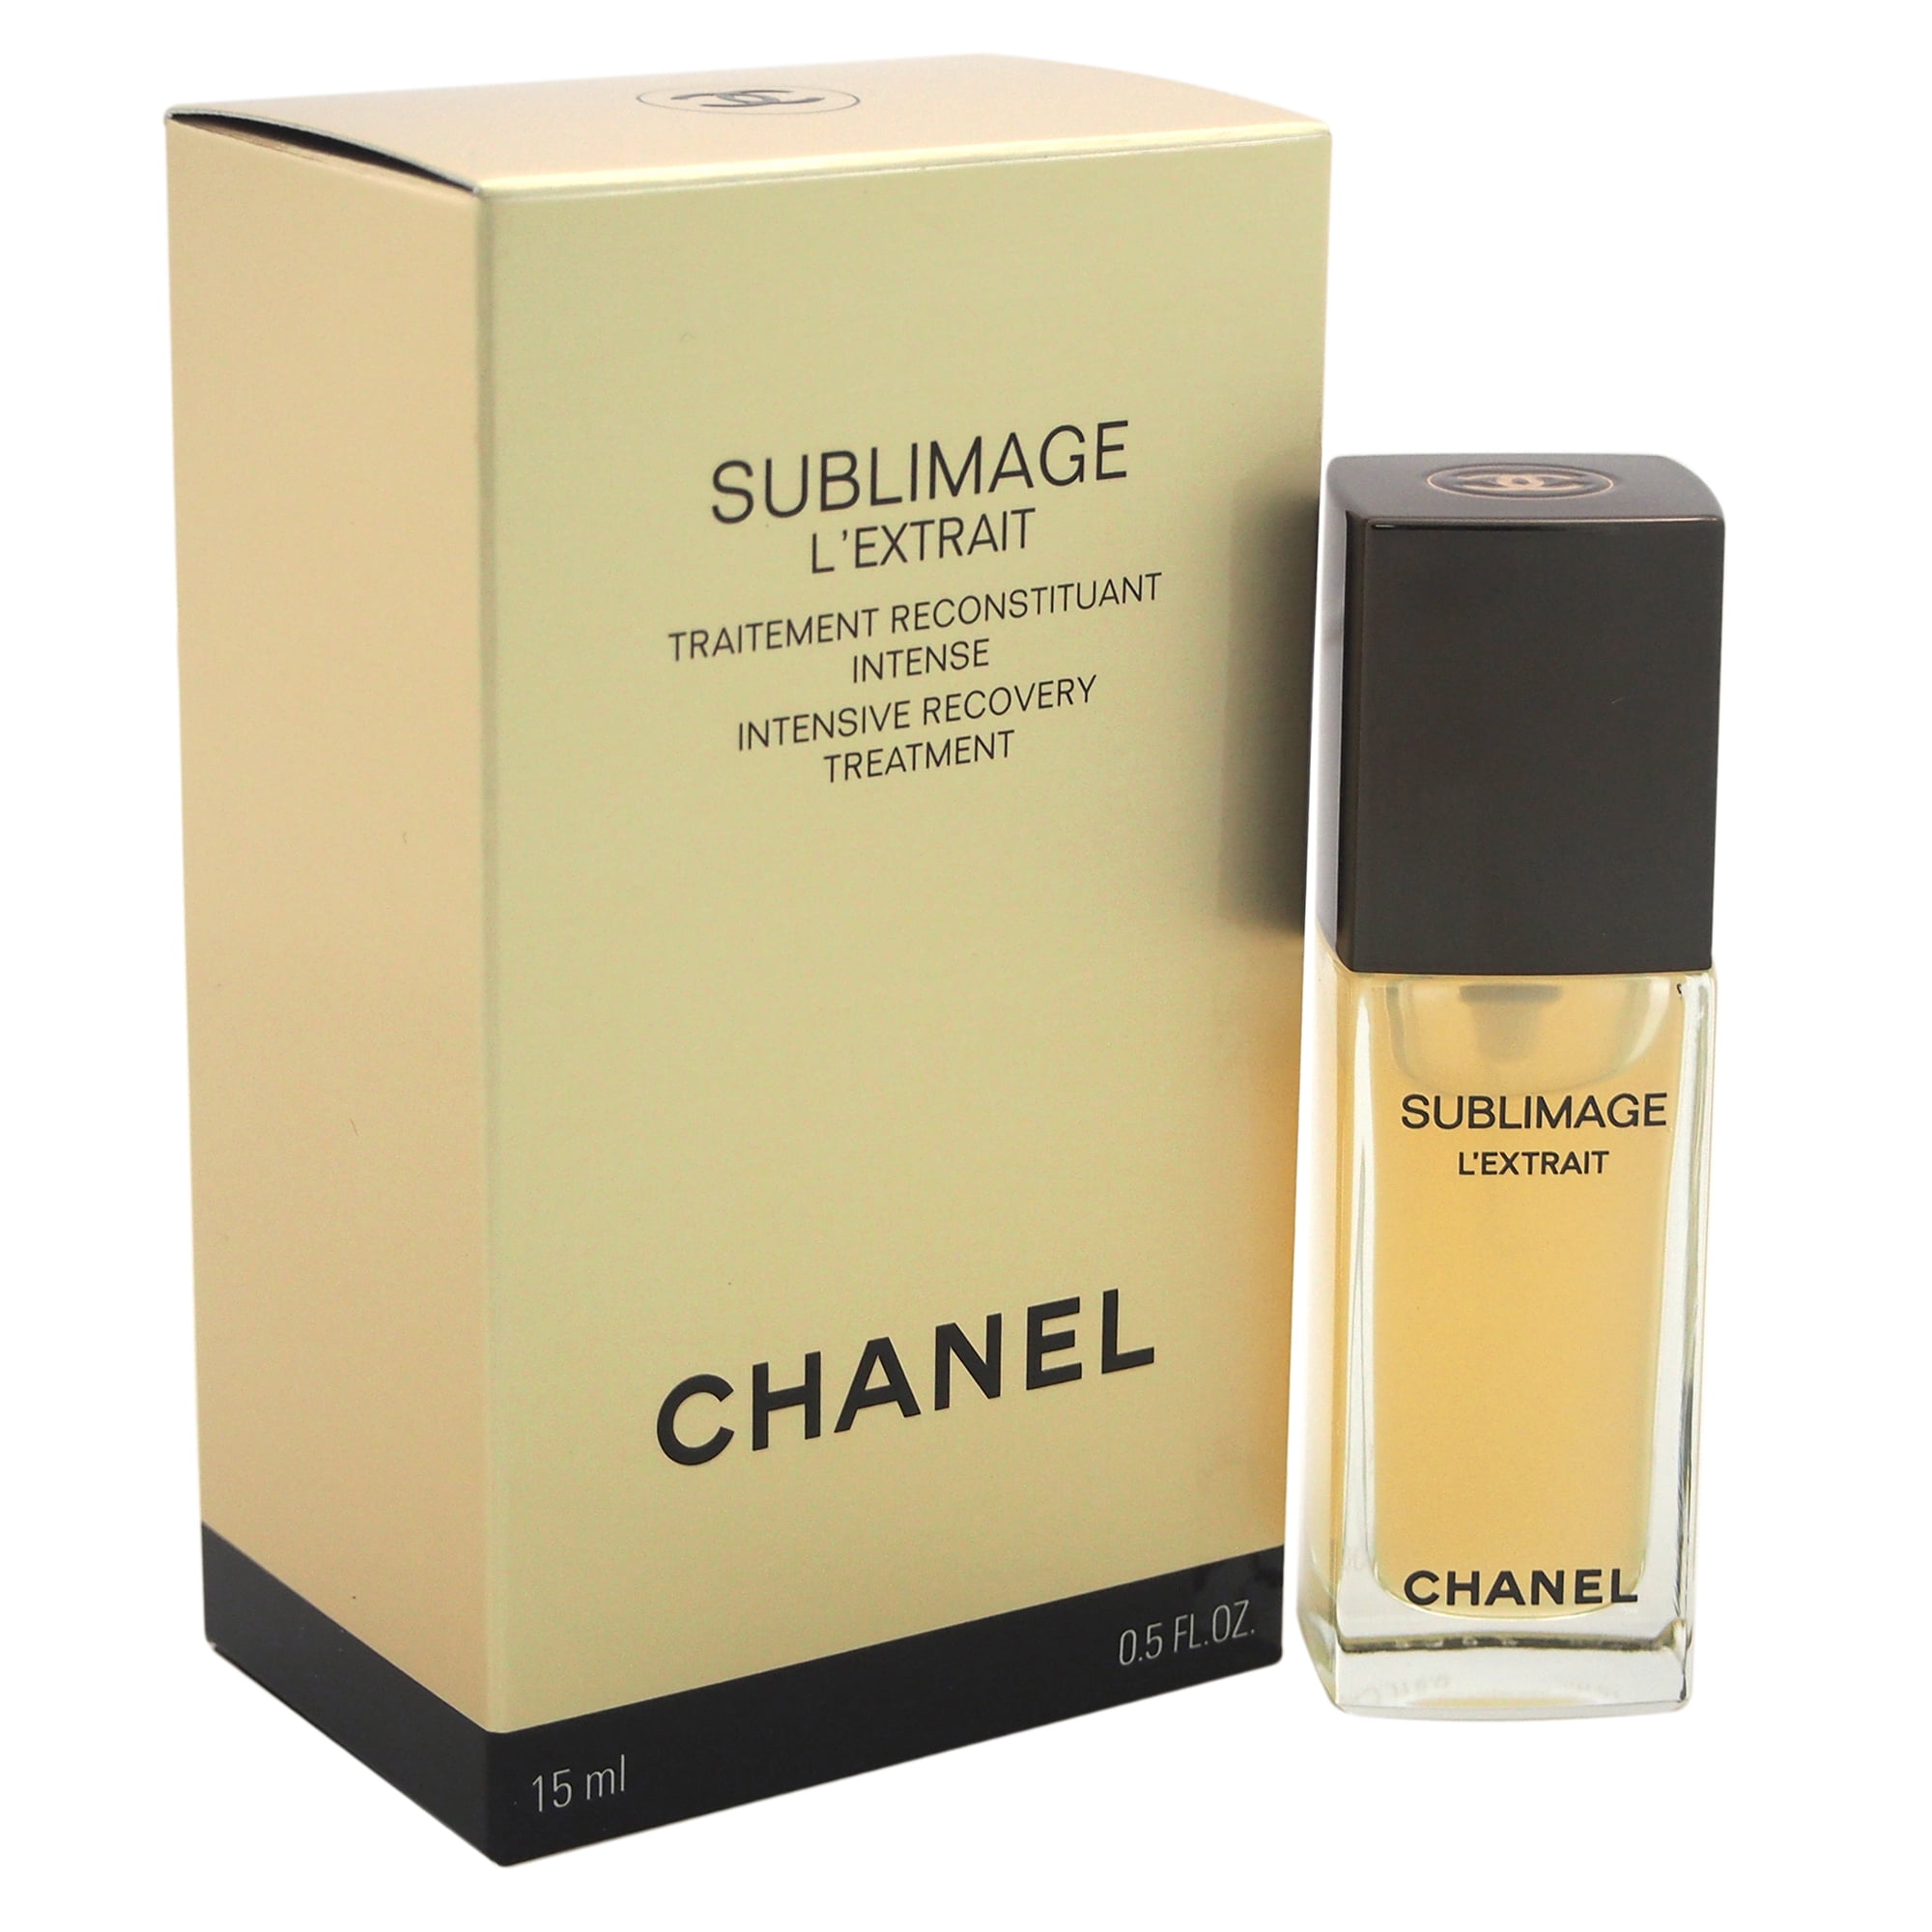 Sublimage LExtrait Intensive Recovery Treatment by Chanel for